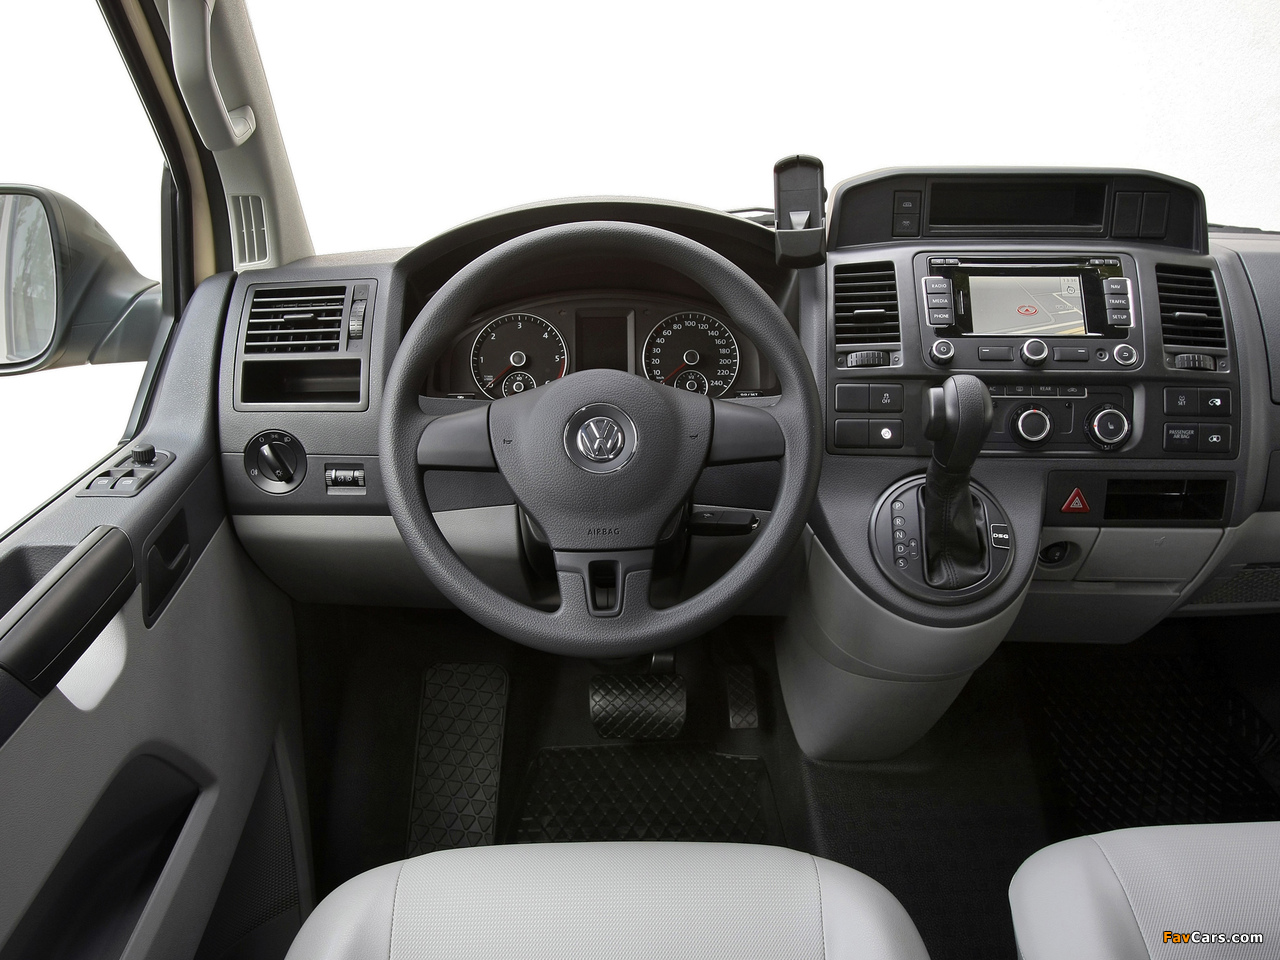 Volkswagen T5 Caravelle Taxi 2009 photos (1280 x 960)